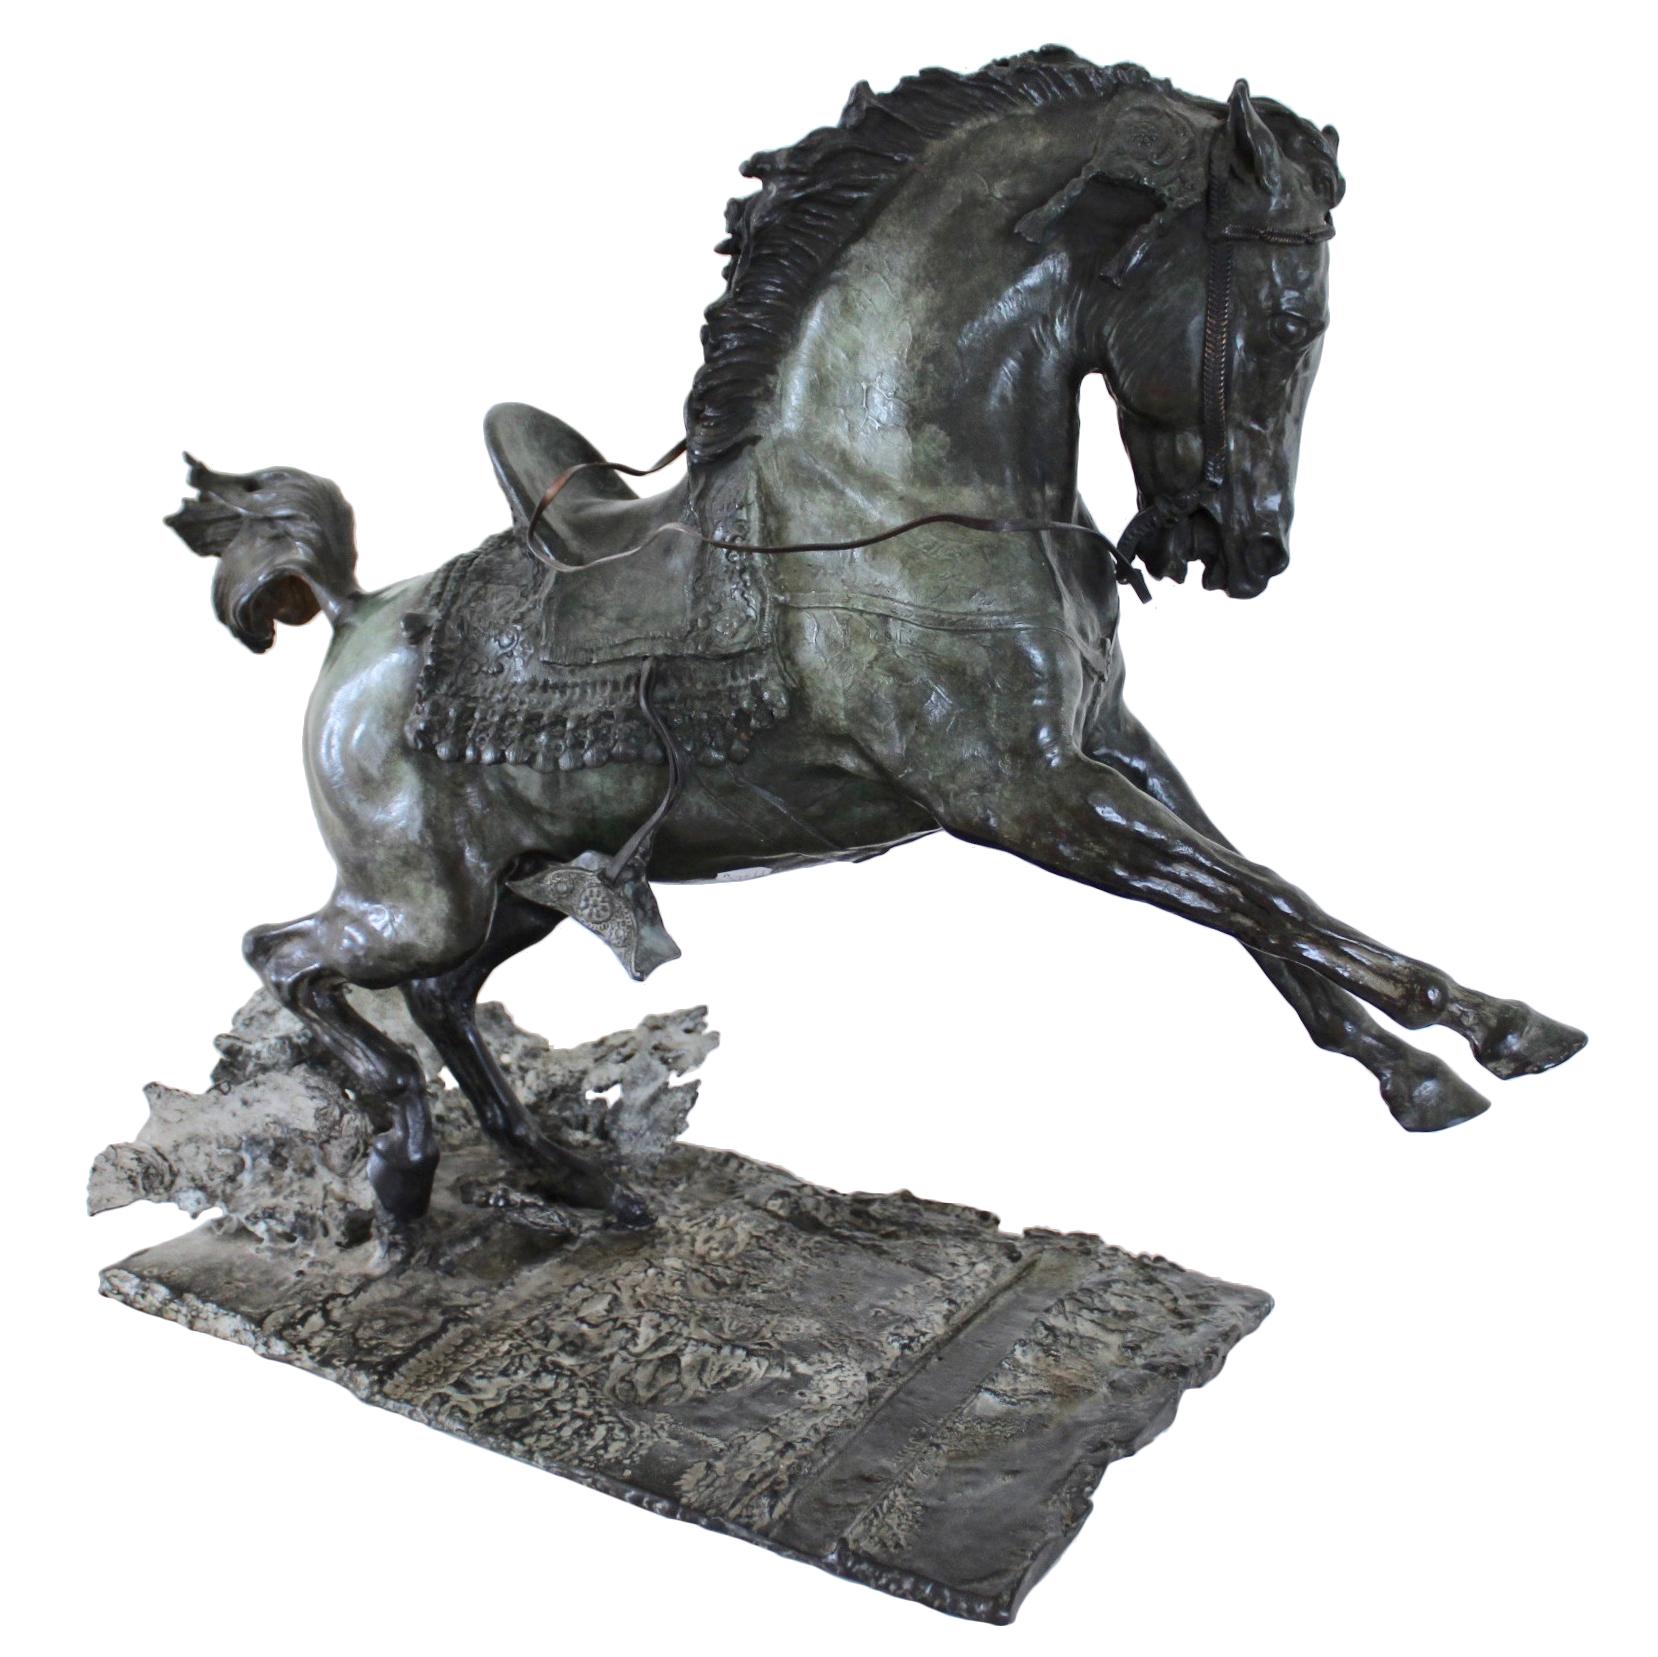 Exceptional bronze sculpture depicting a harnessed Arabian horse in action with a fabulous patina. Made in 1998 By Frederic Jager (1957-) French sculptor of animals, particularly Horses. According to French law (1960's) to be a qualified 